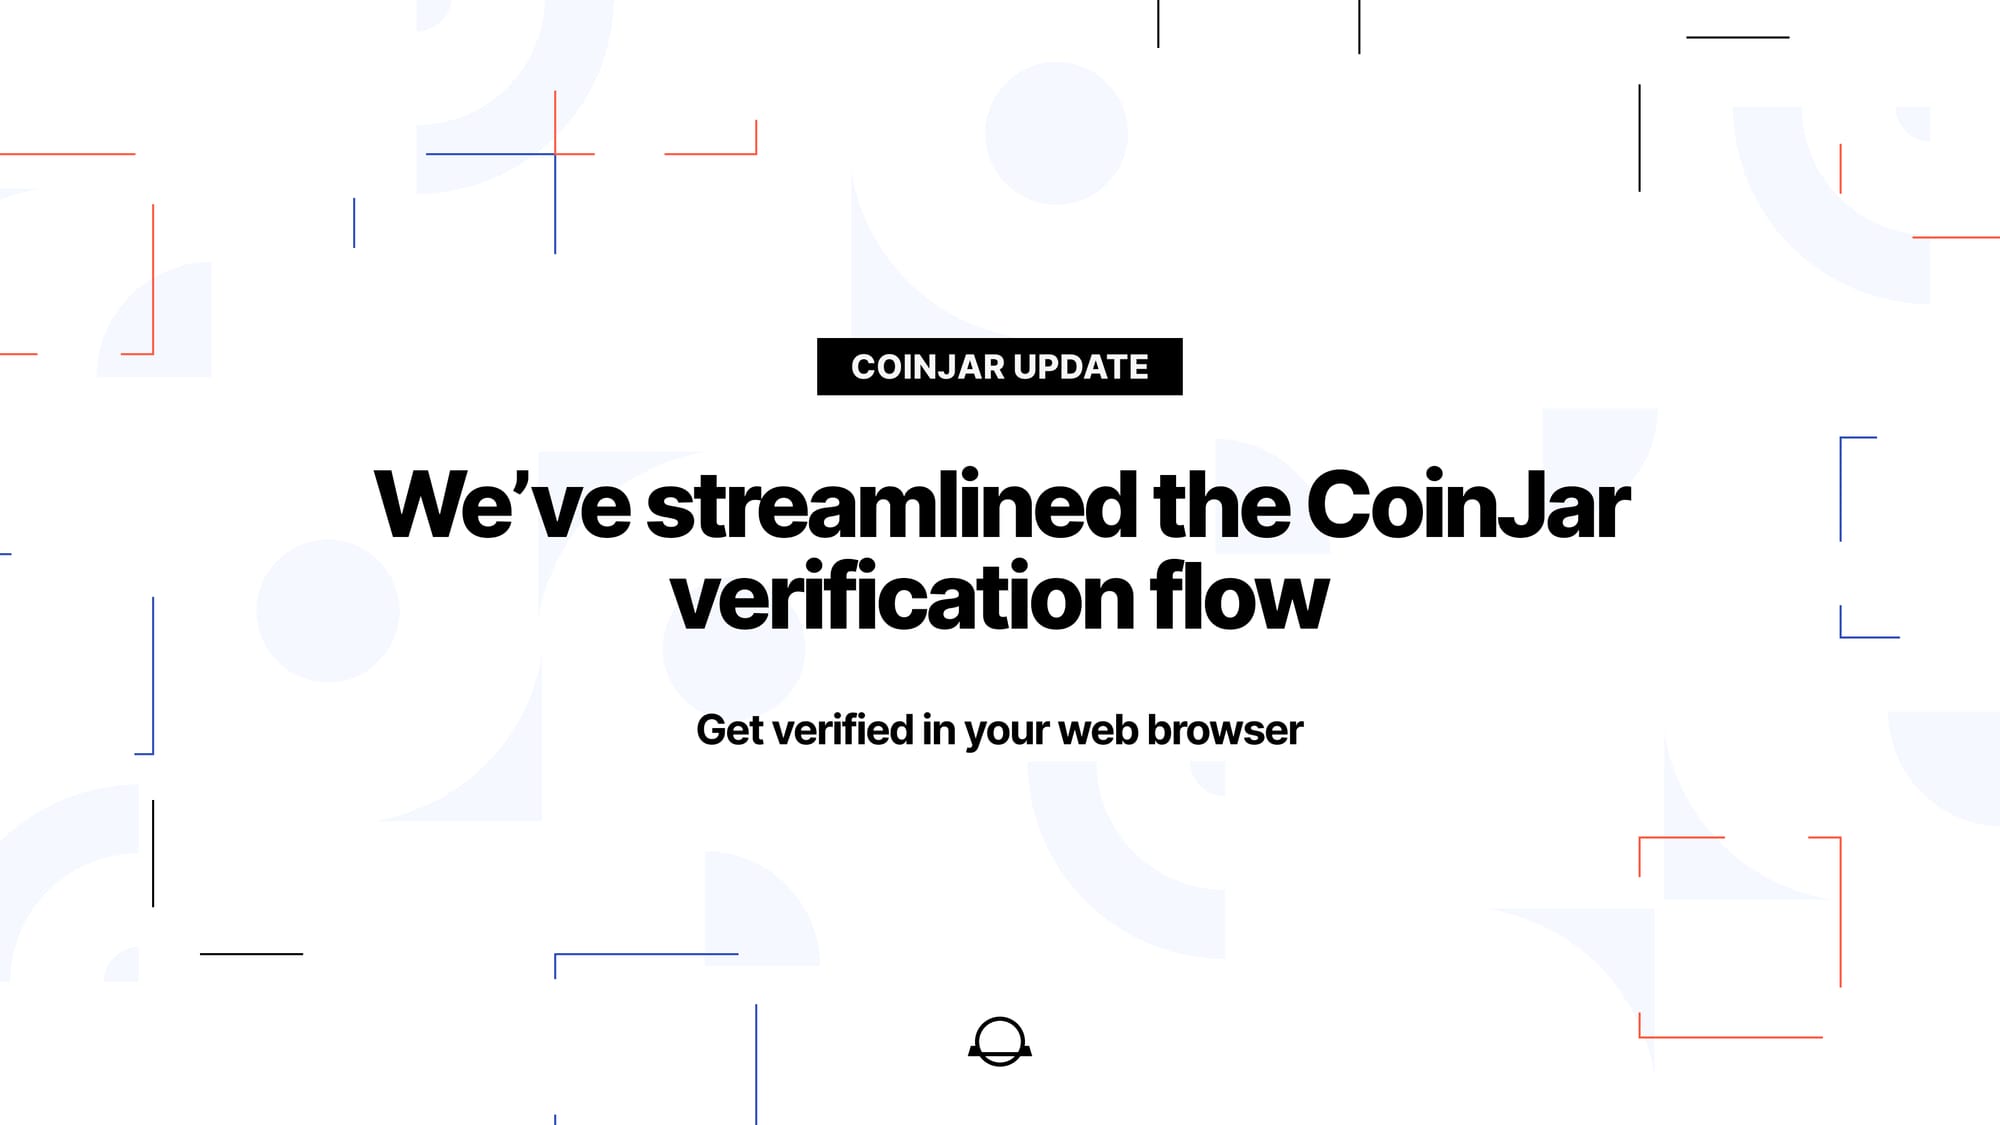 You Can Now Verify Your CoinJar Account in a Web Browser – No Mobile App Needed